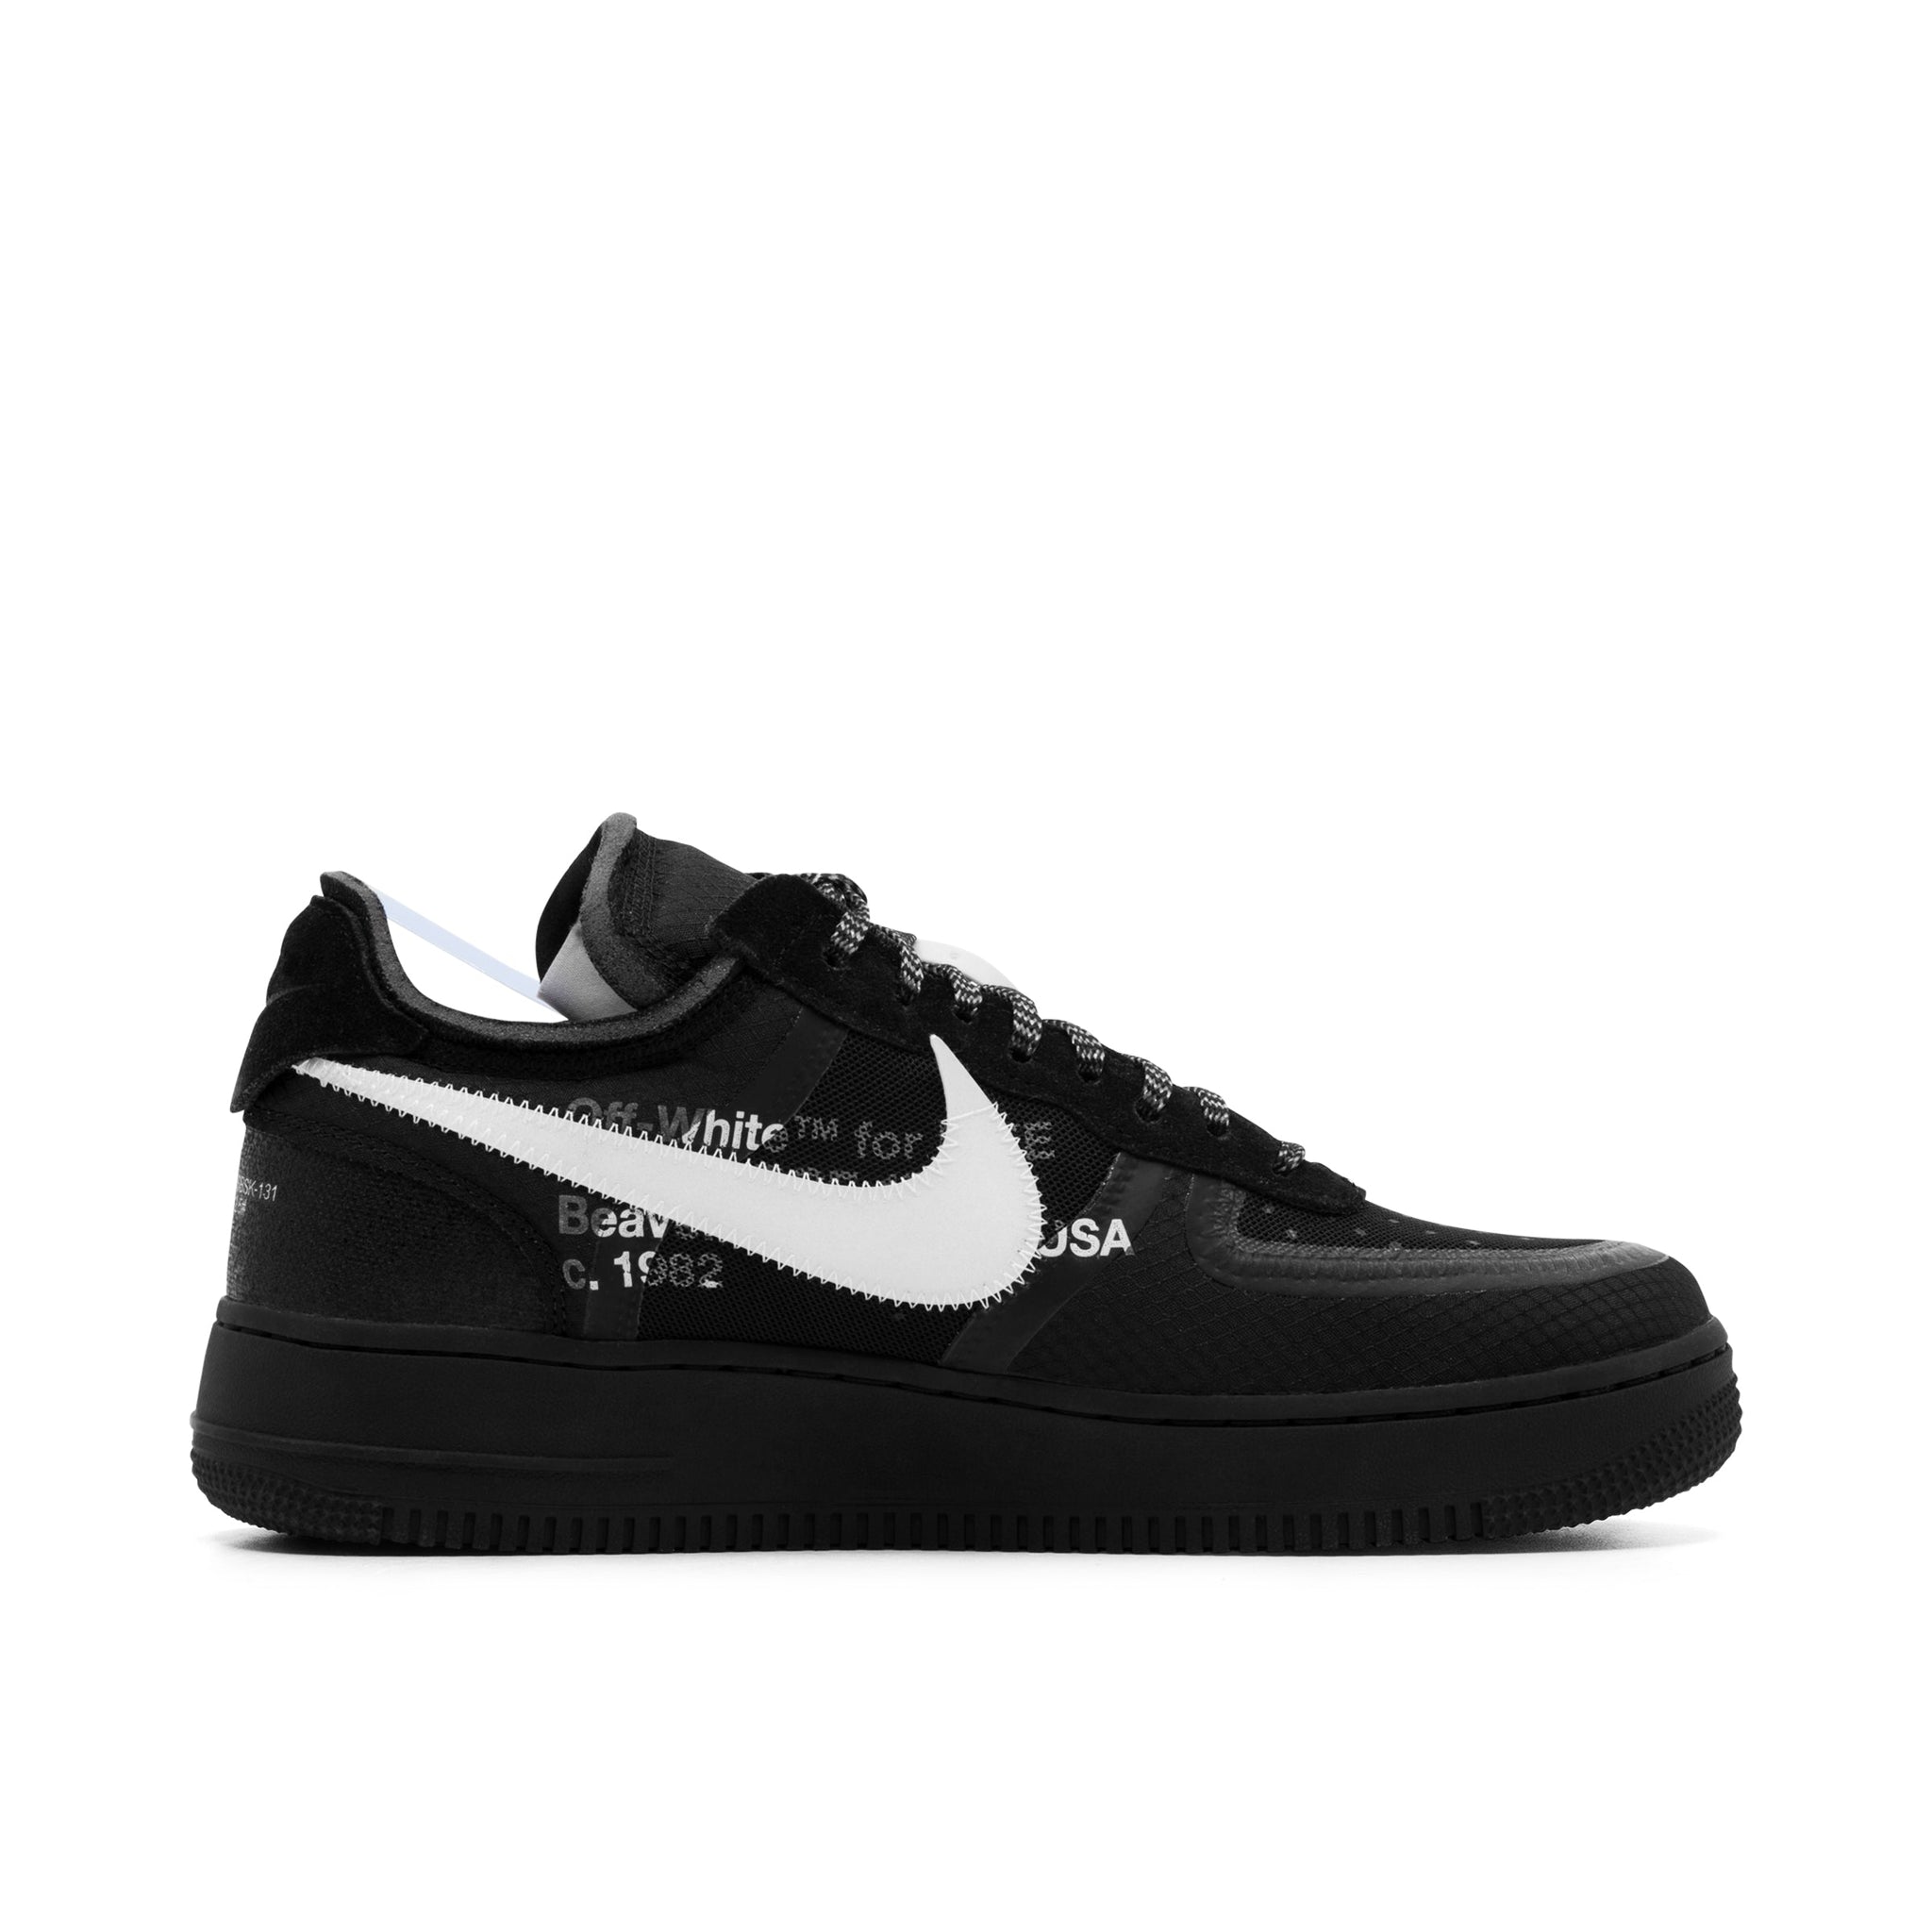 NIKE AIR FORCE 1 LOW OFF-WHITE BLACK